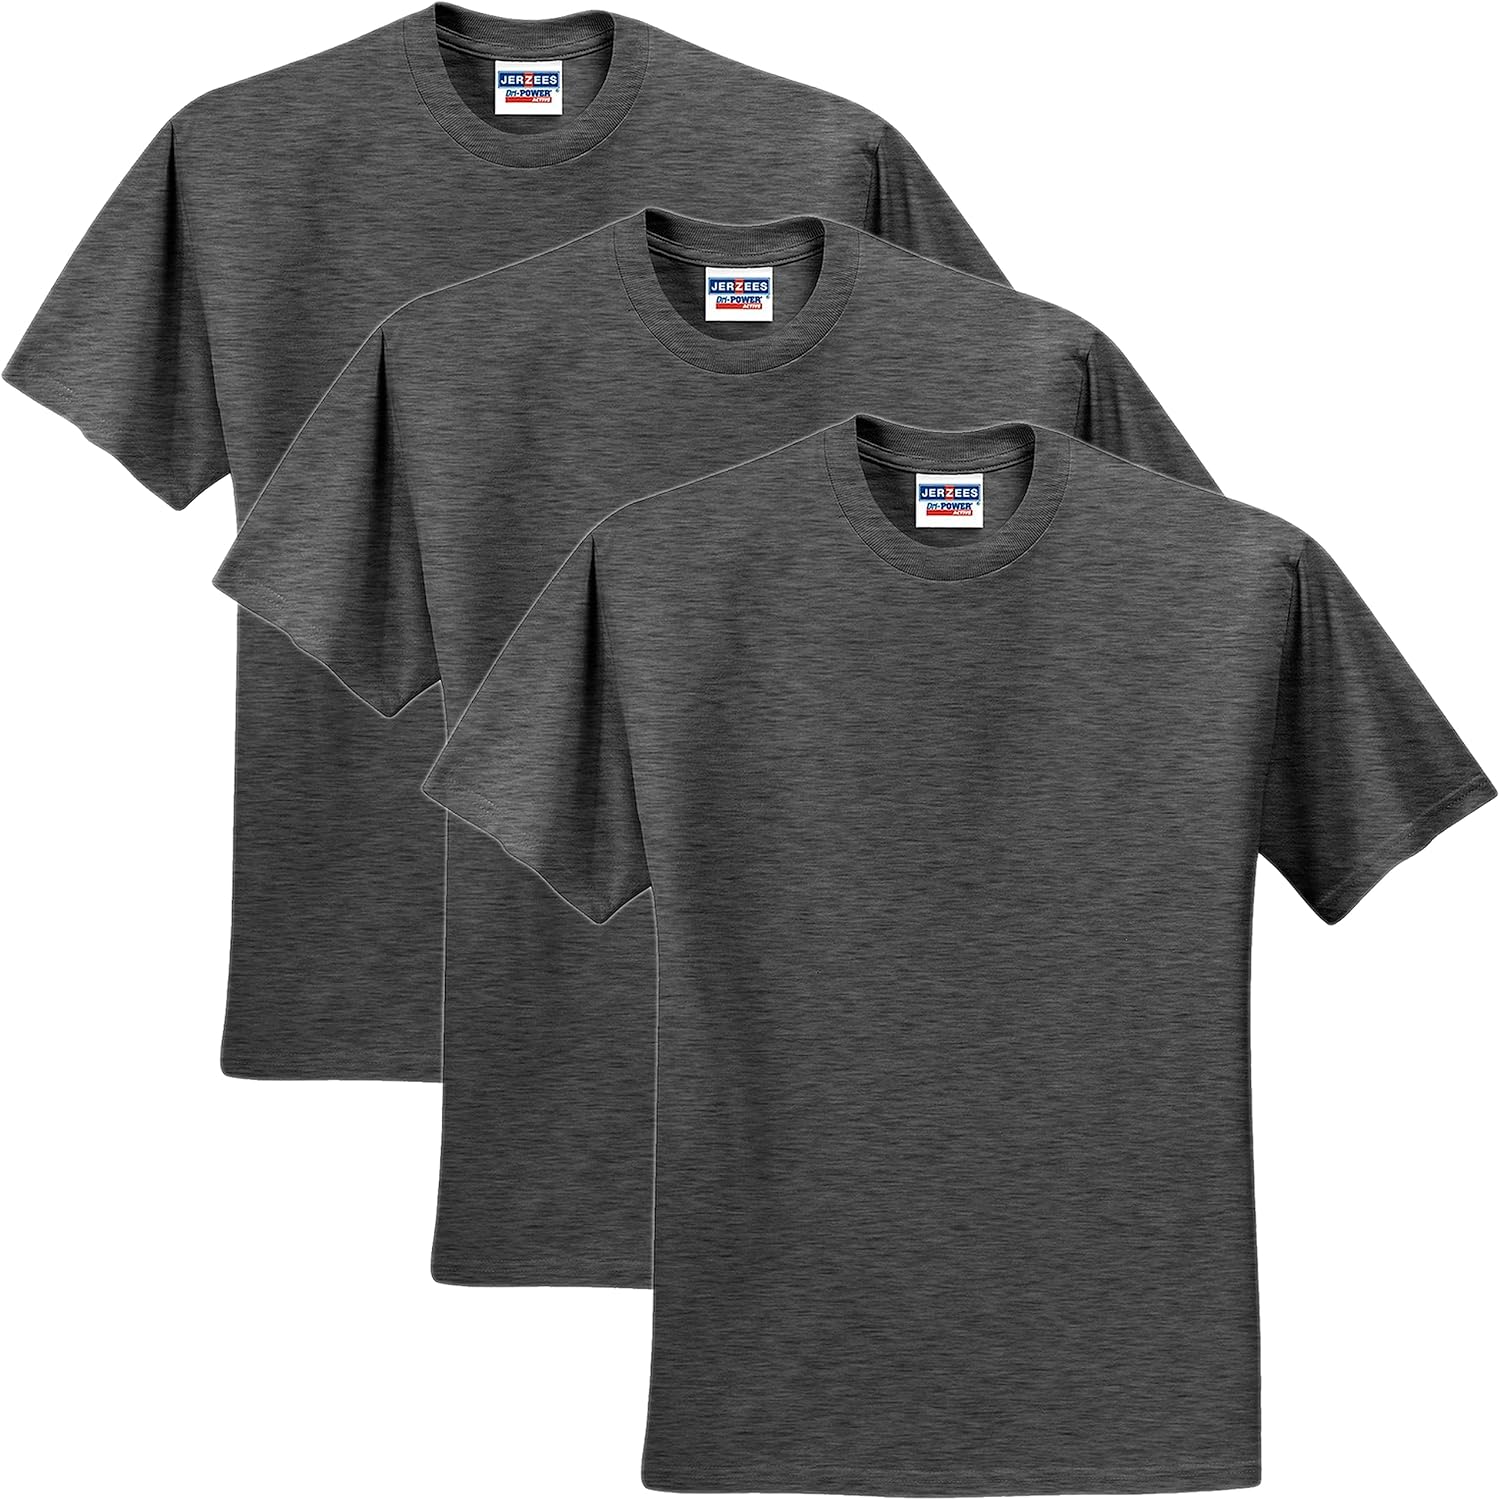 Fits right and priced right, not heavy and breathes! I really like these shirts!